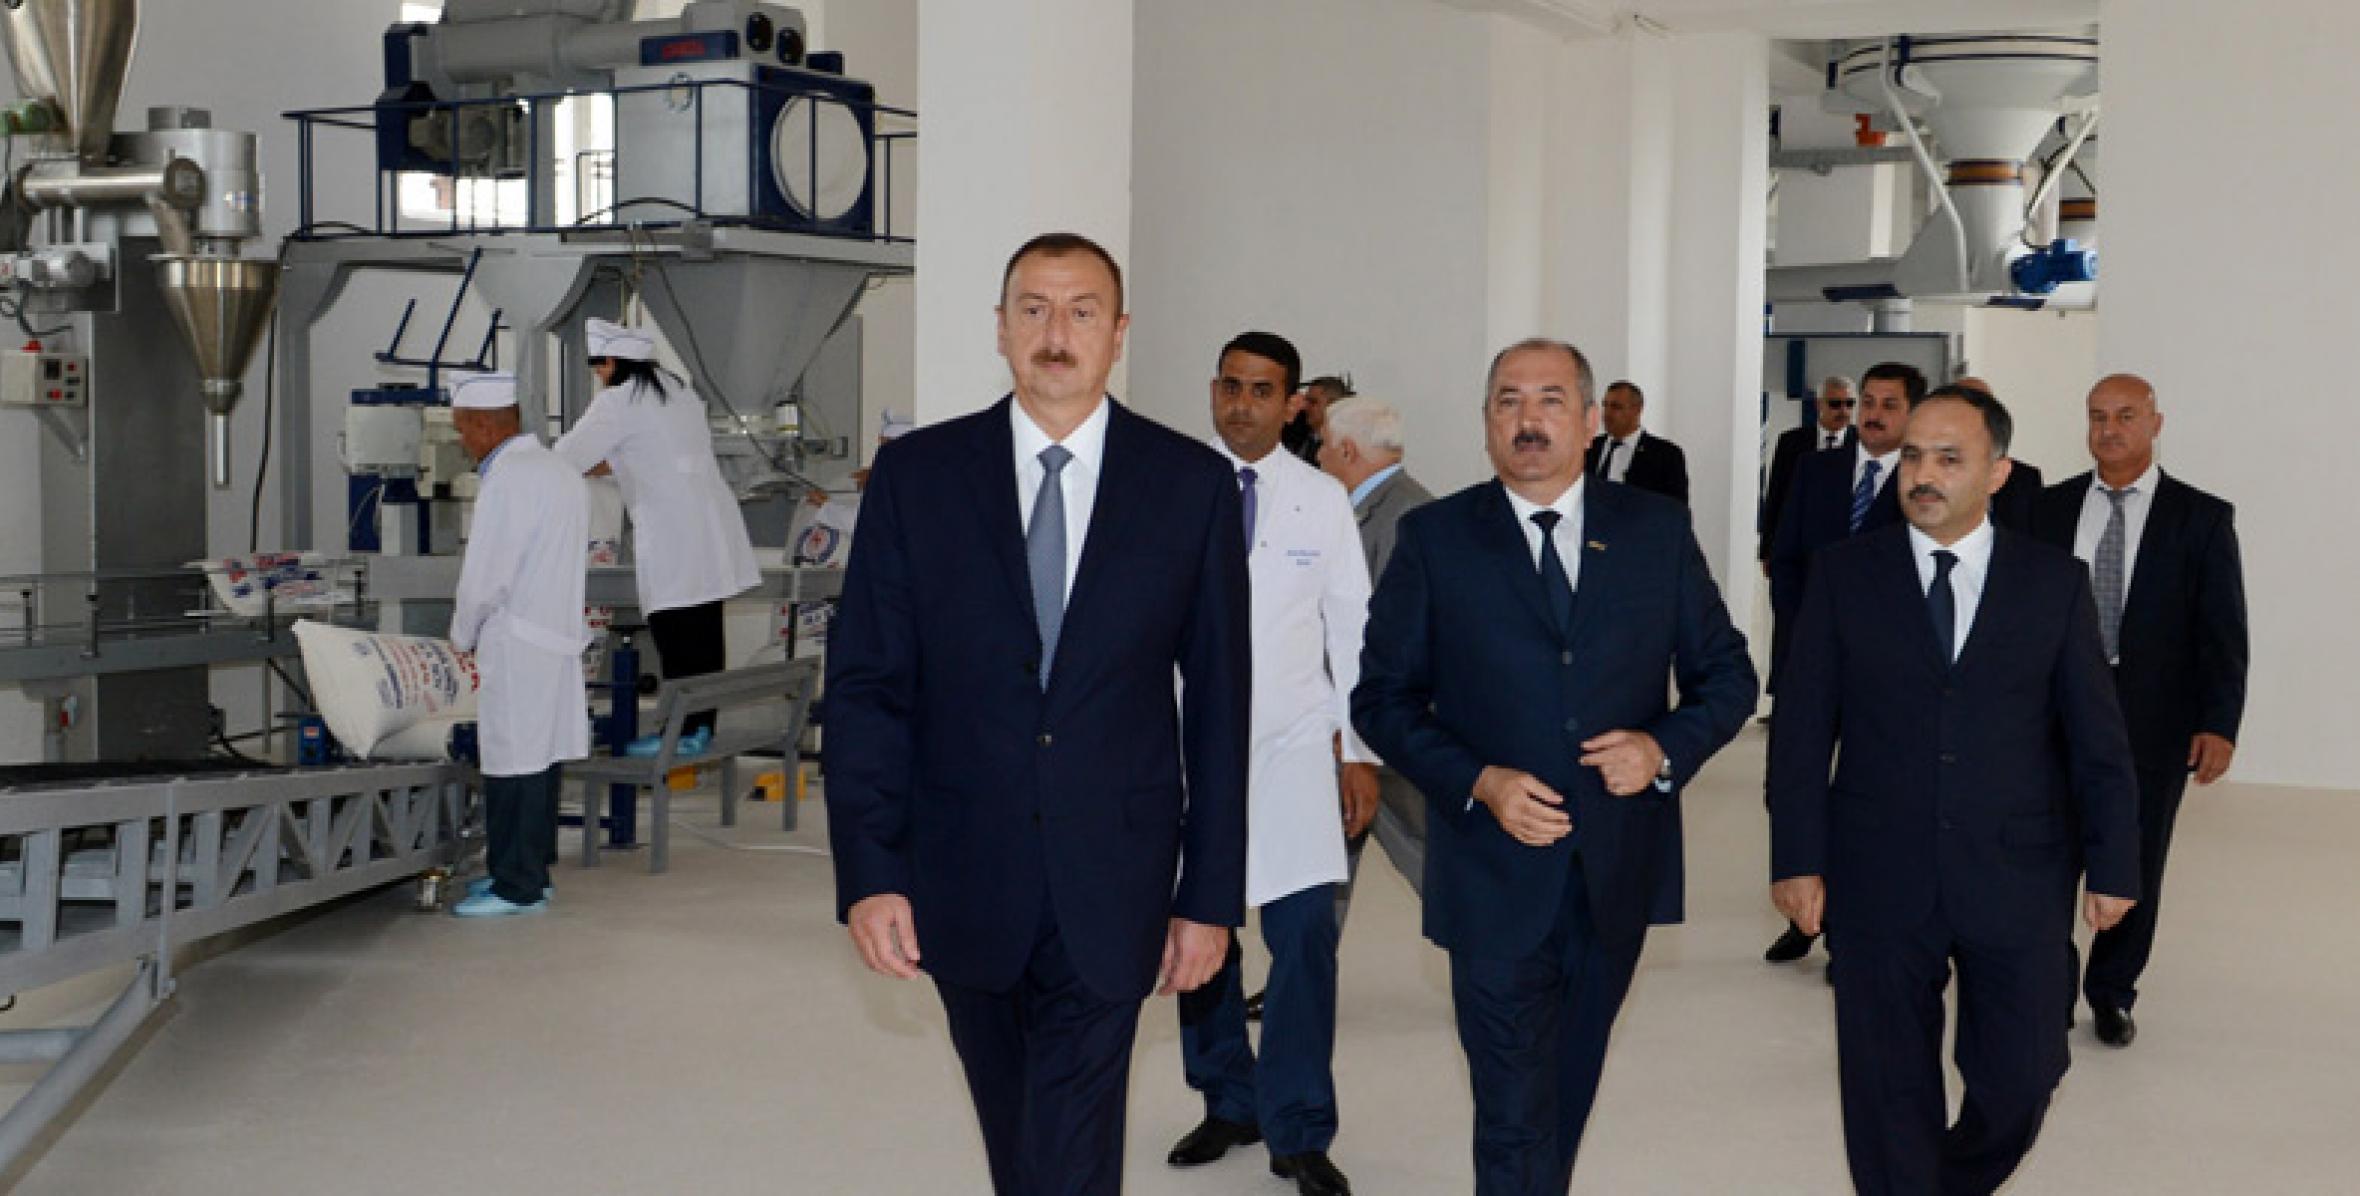 Ilham Aliyev attended the opening of an “Avangard” CJSC factory in Jalilabad